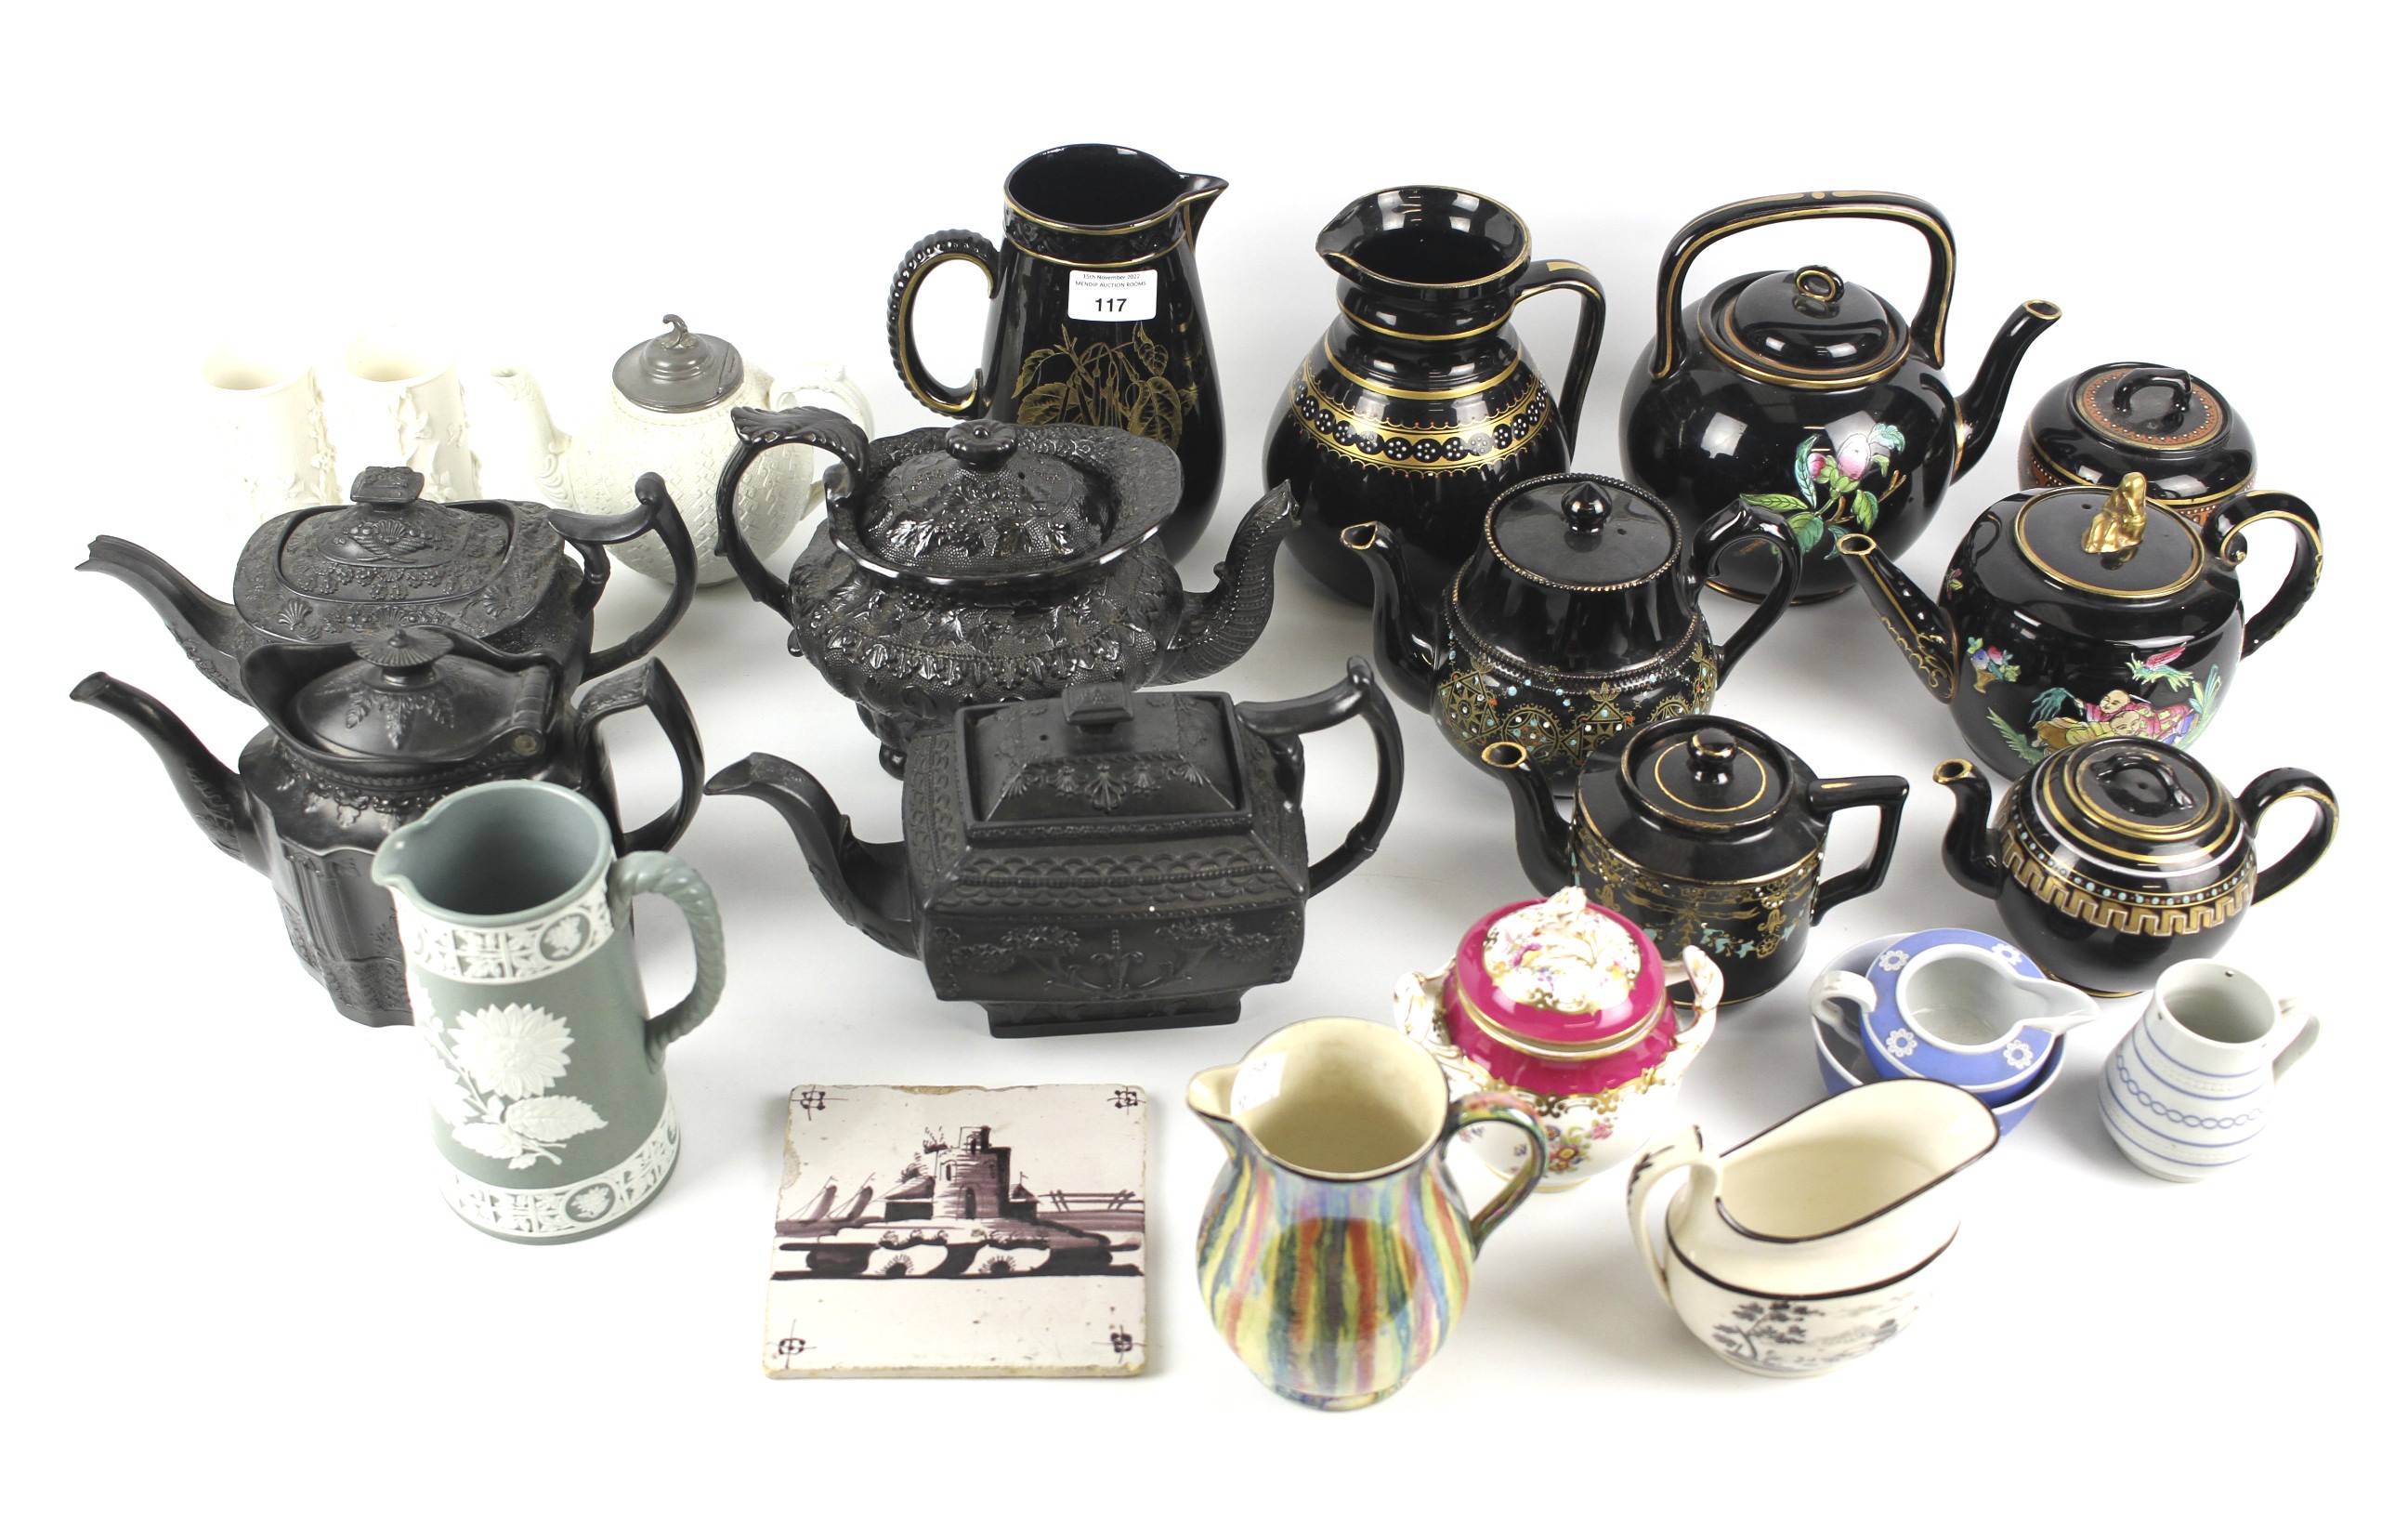 A large collection of 19th century English pottery and porcelain.